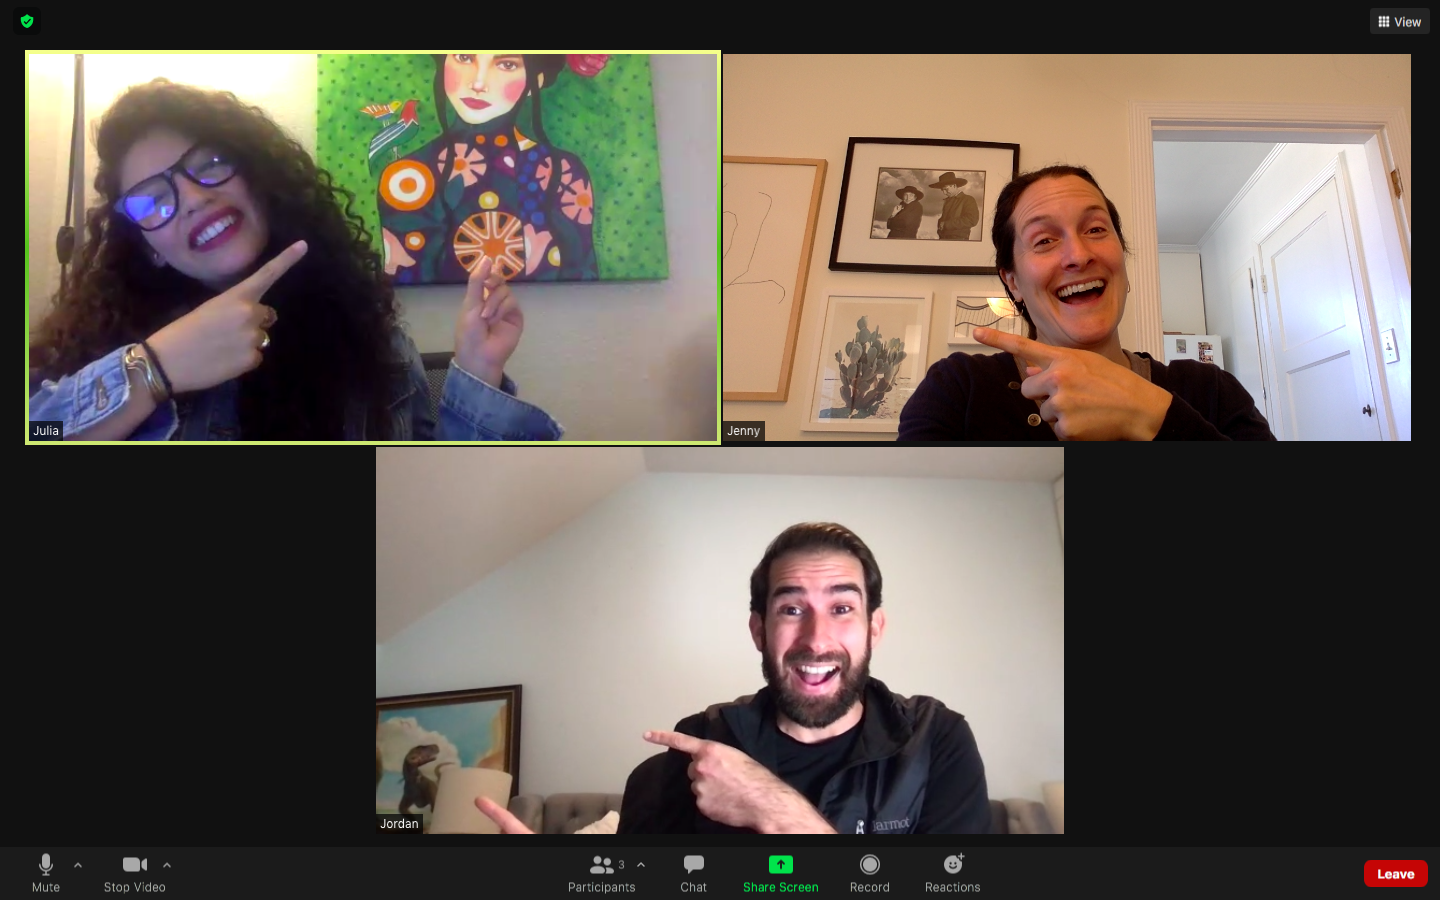 We like to have fun during Zoom meetings! We have a hybrid workforce - some prefer offices and some prefer WFH